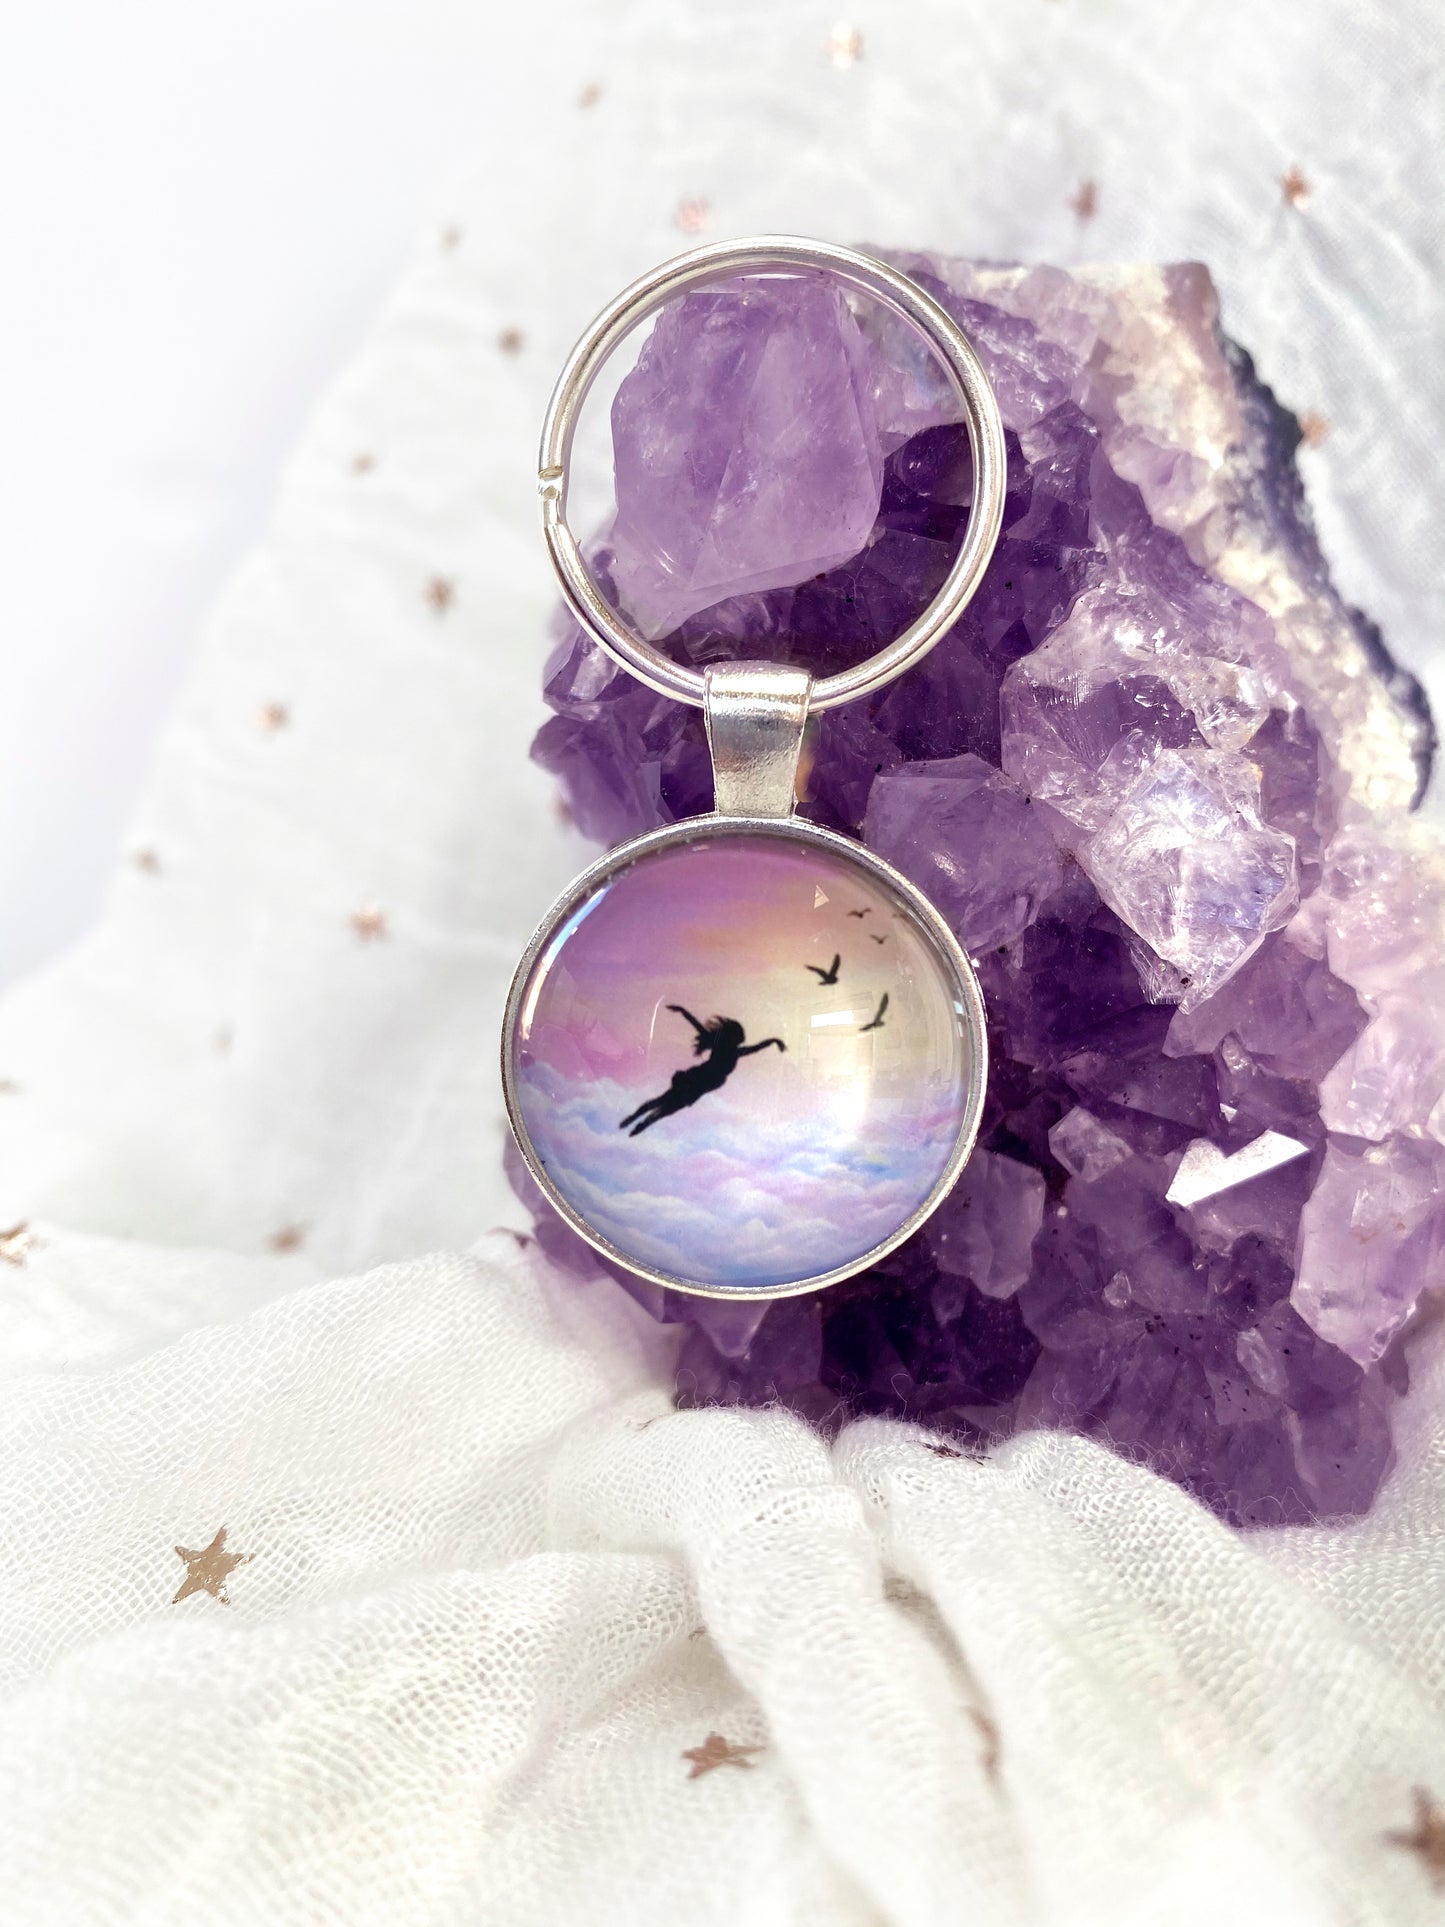 Let go and Fly Glass Pendant Keyring